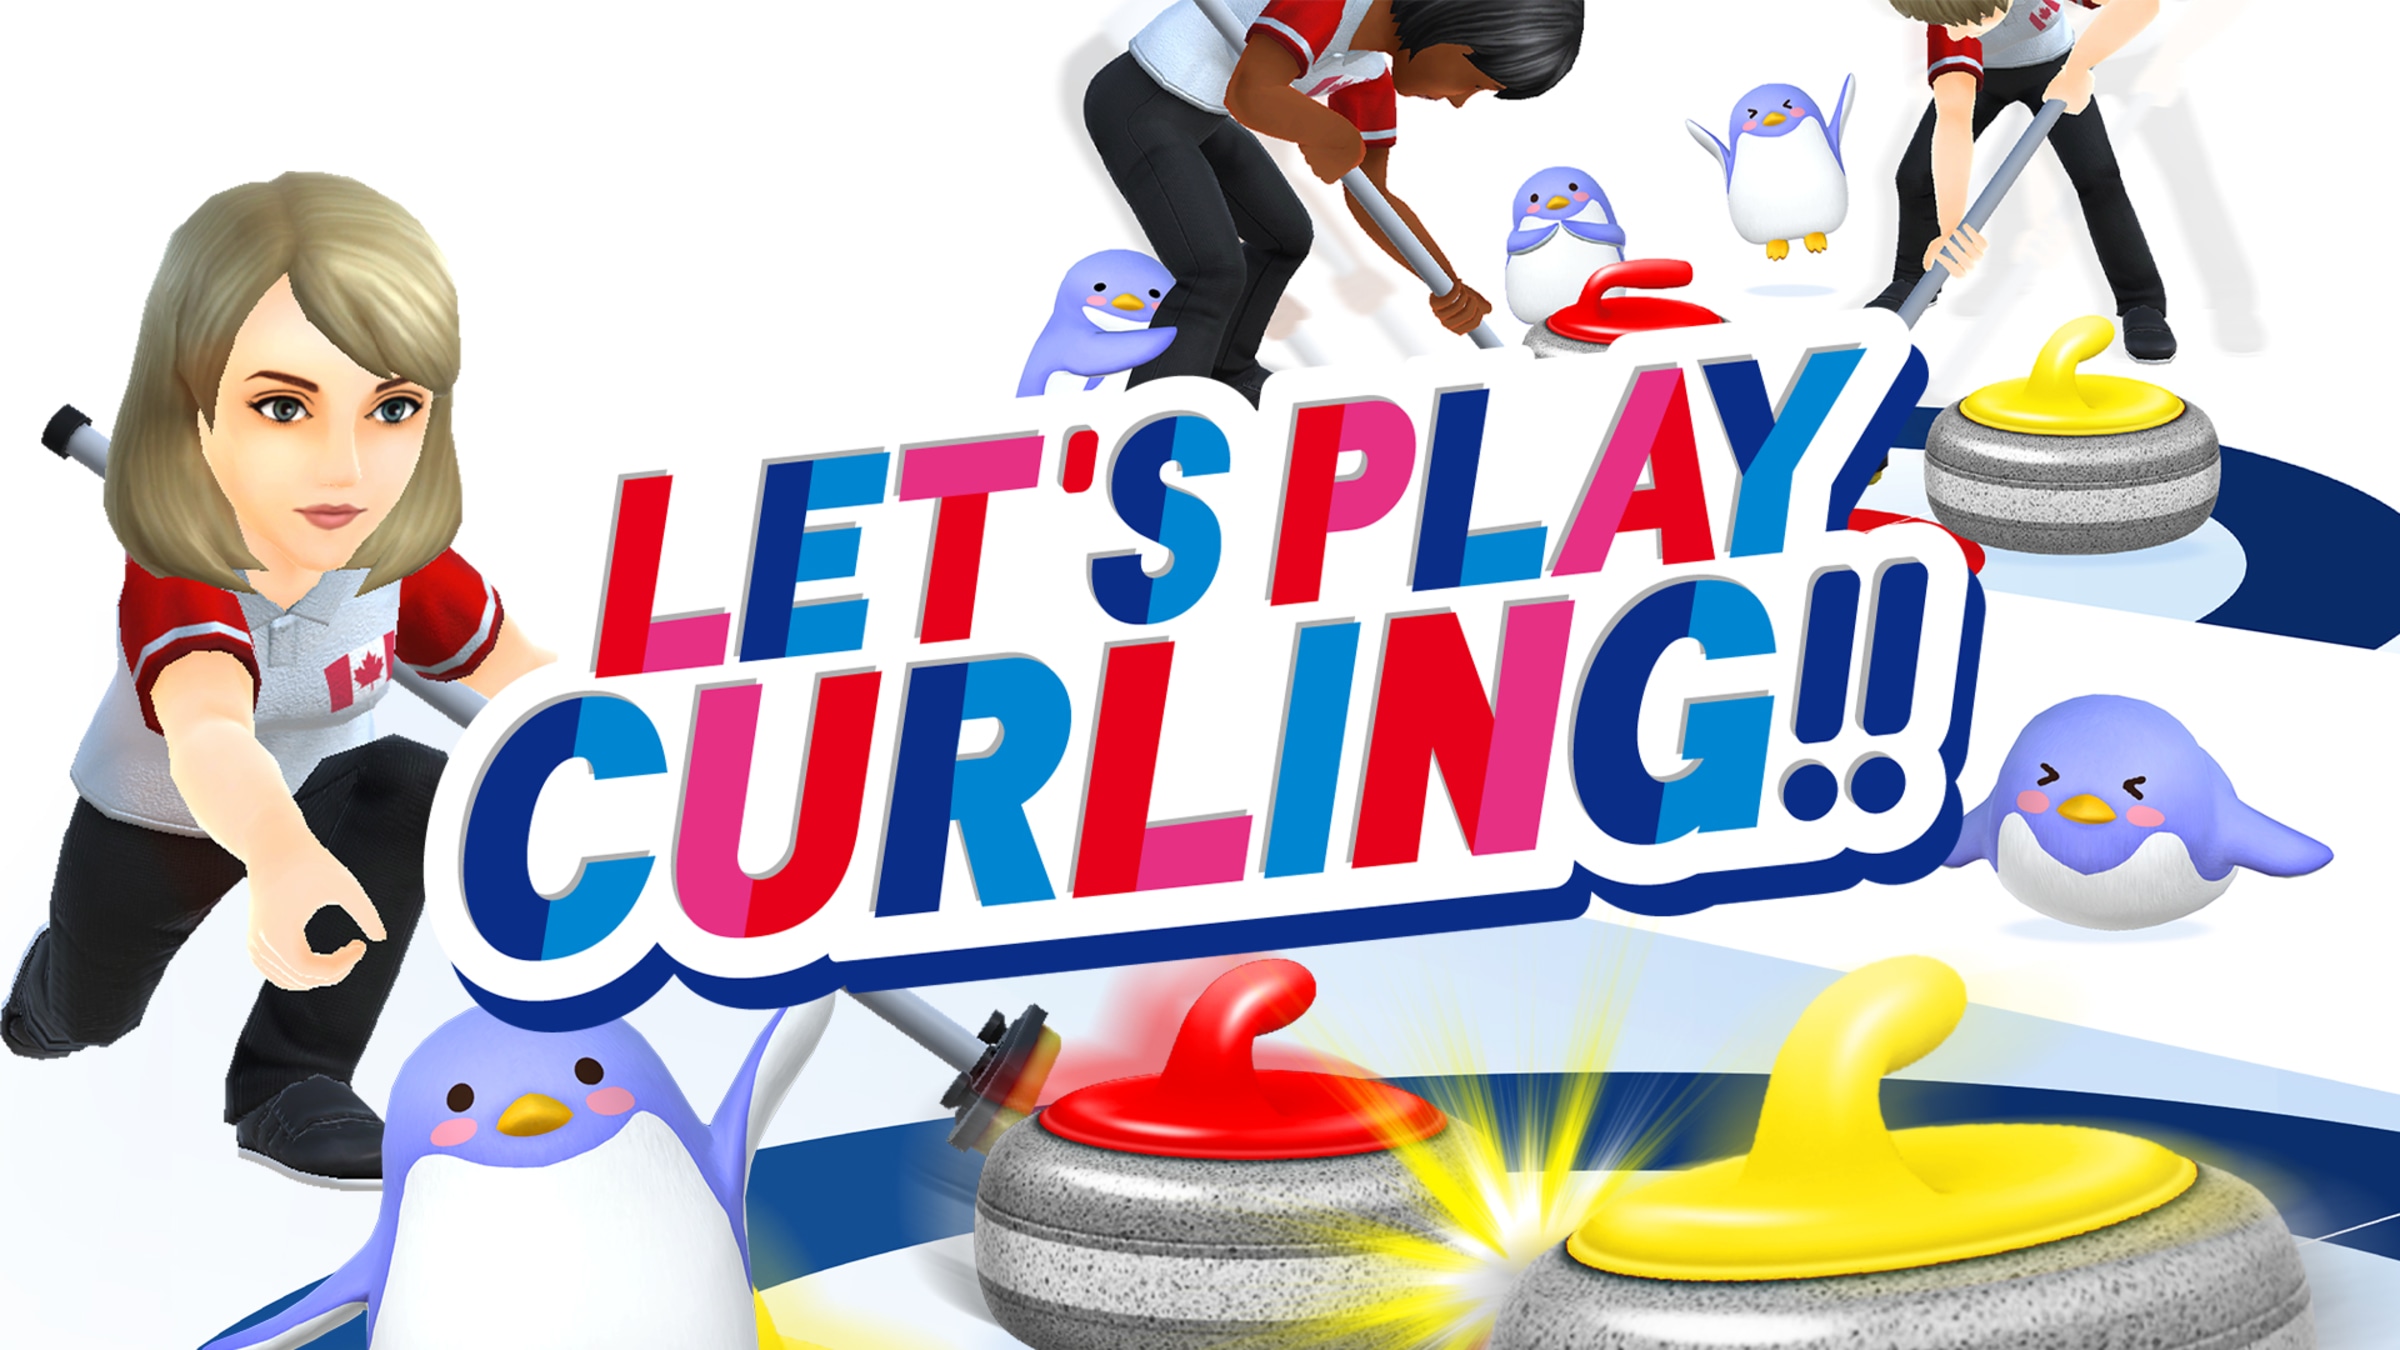 LETS PLAY CURLING!! for Nintendo Switch